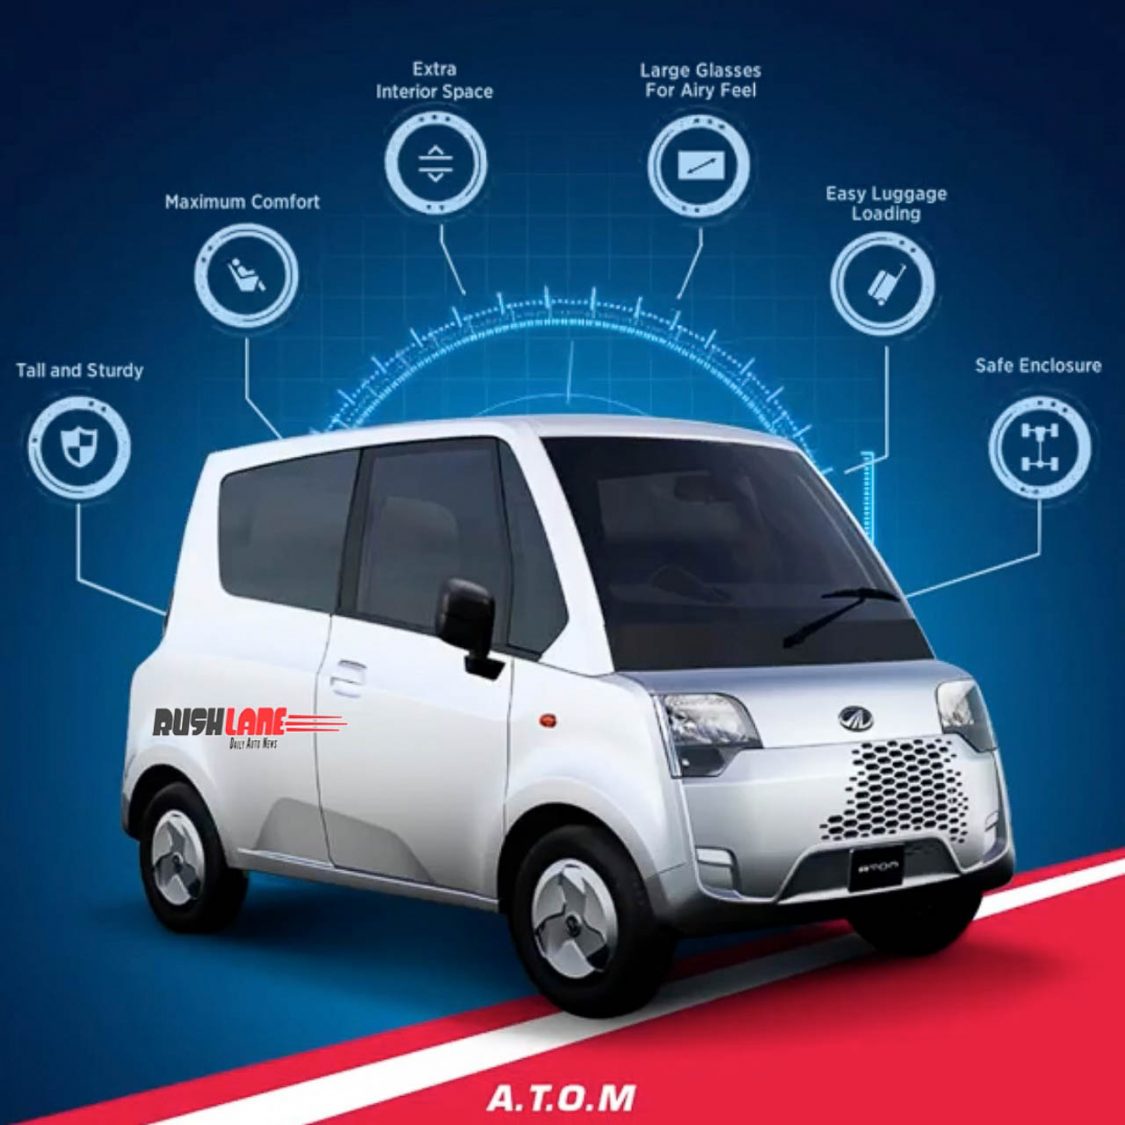 Mahindra Atom electric features teased New spy shots show road presence